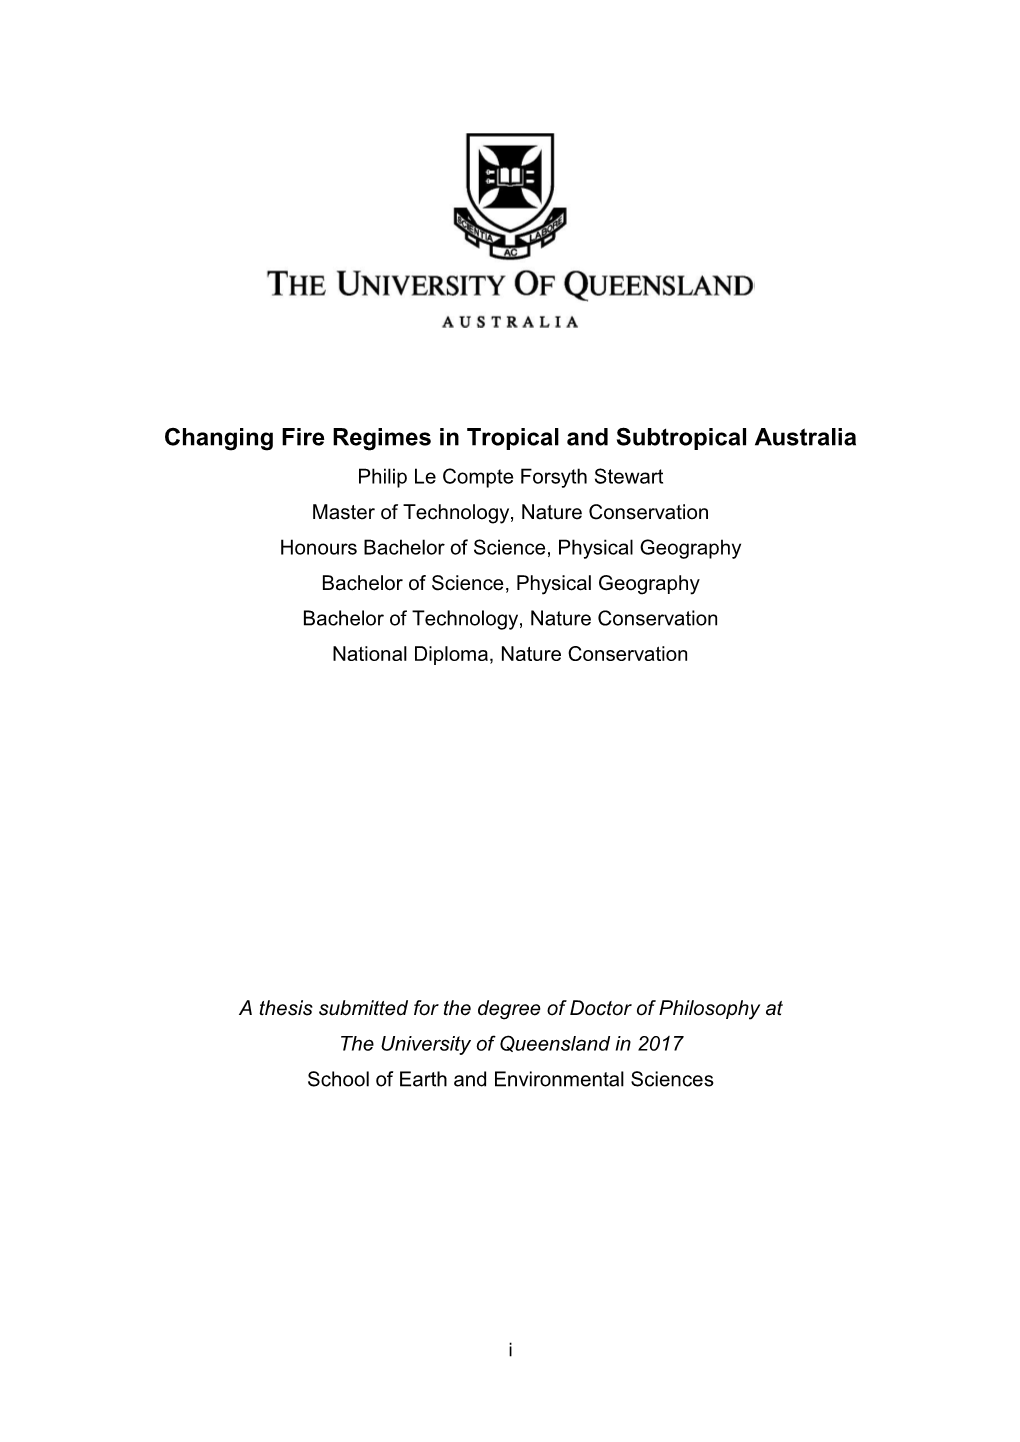 Changing Fire Regimes in Tropical and Subtropical Australia